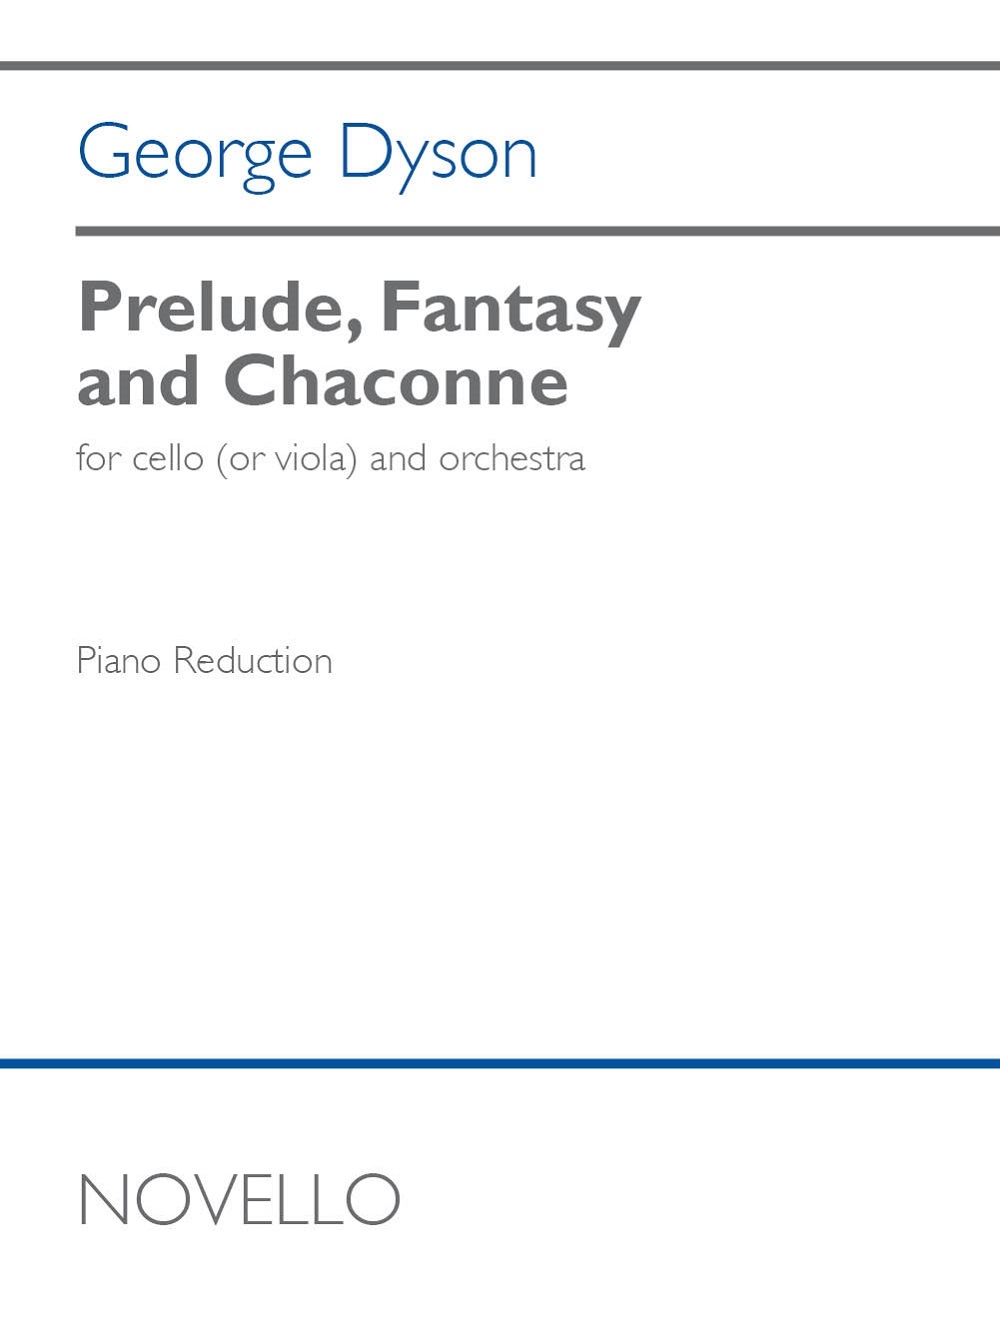 George Dyson: Prelude  Fantasy & Chaconne